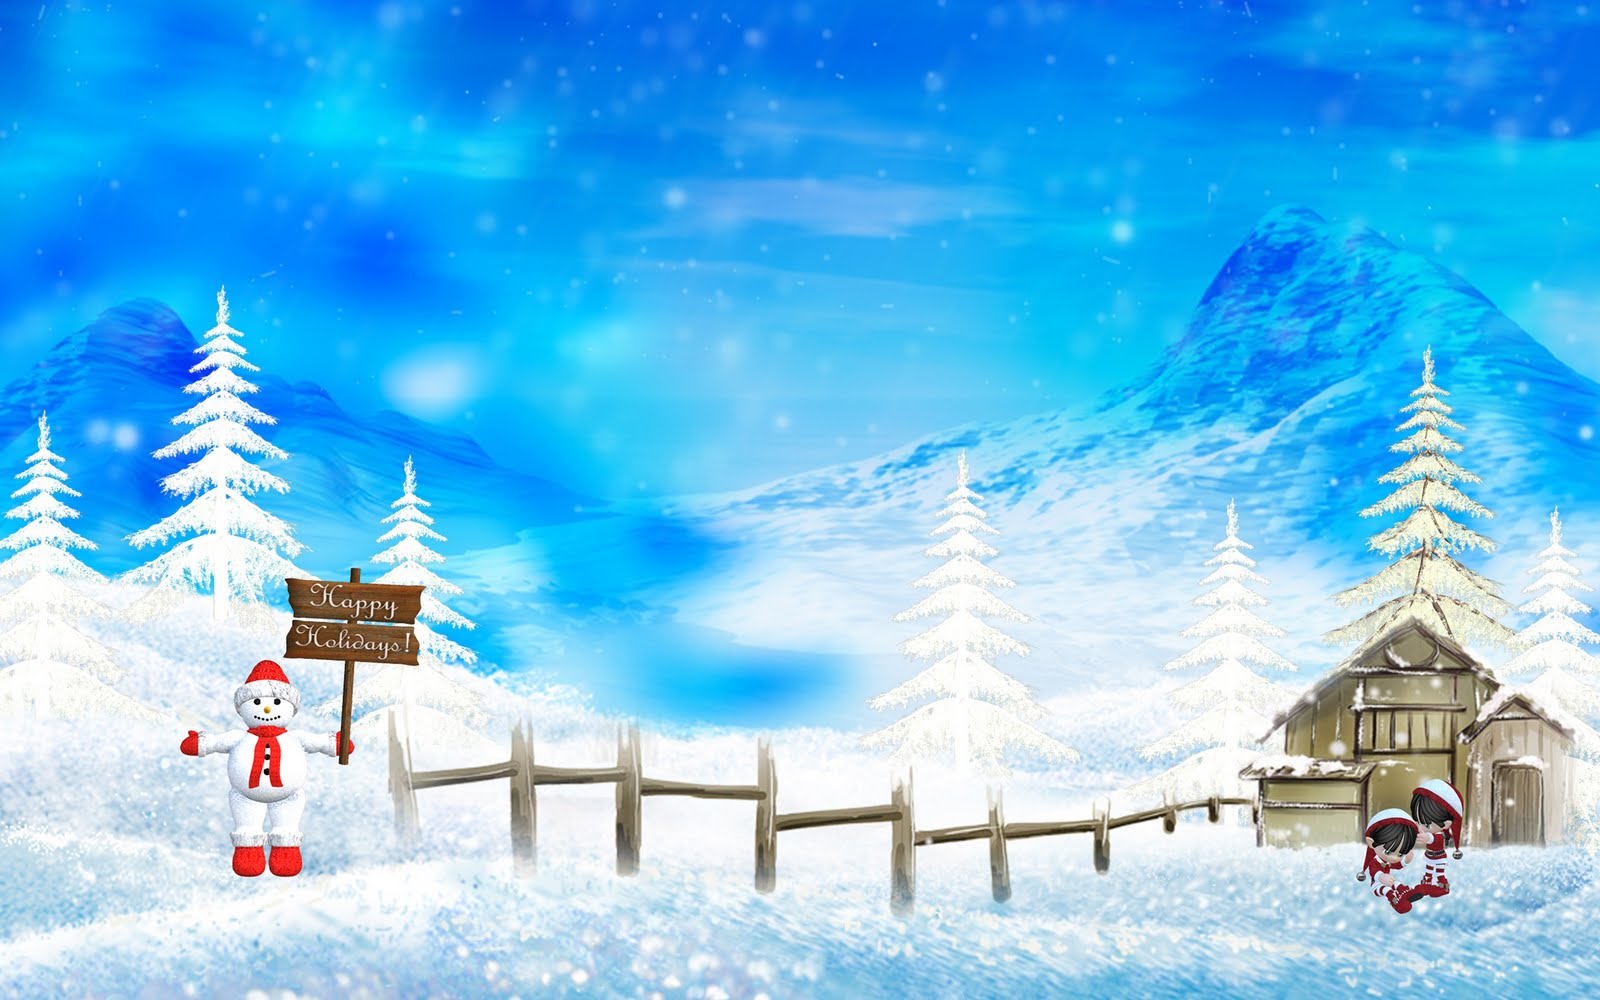 Christmas snow wallpaper image : Blue Mountains , Trees covered by white 